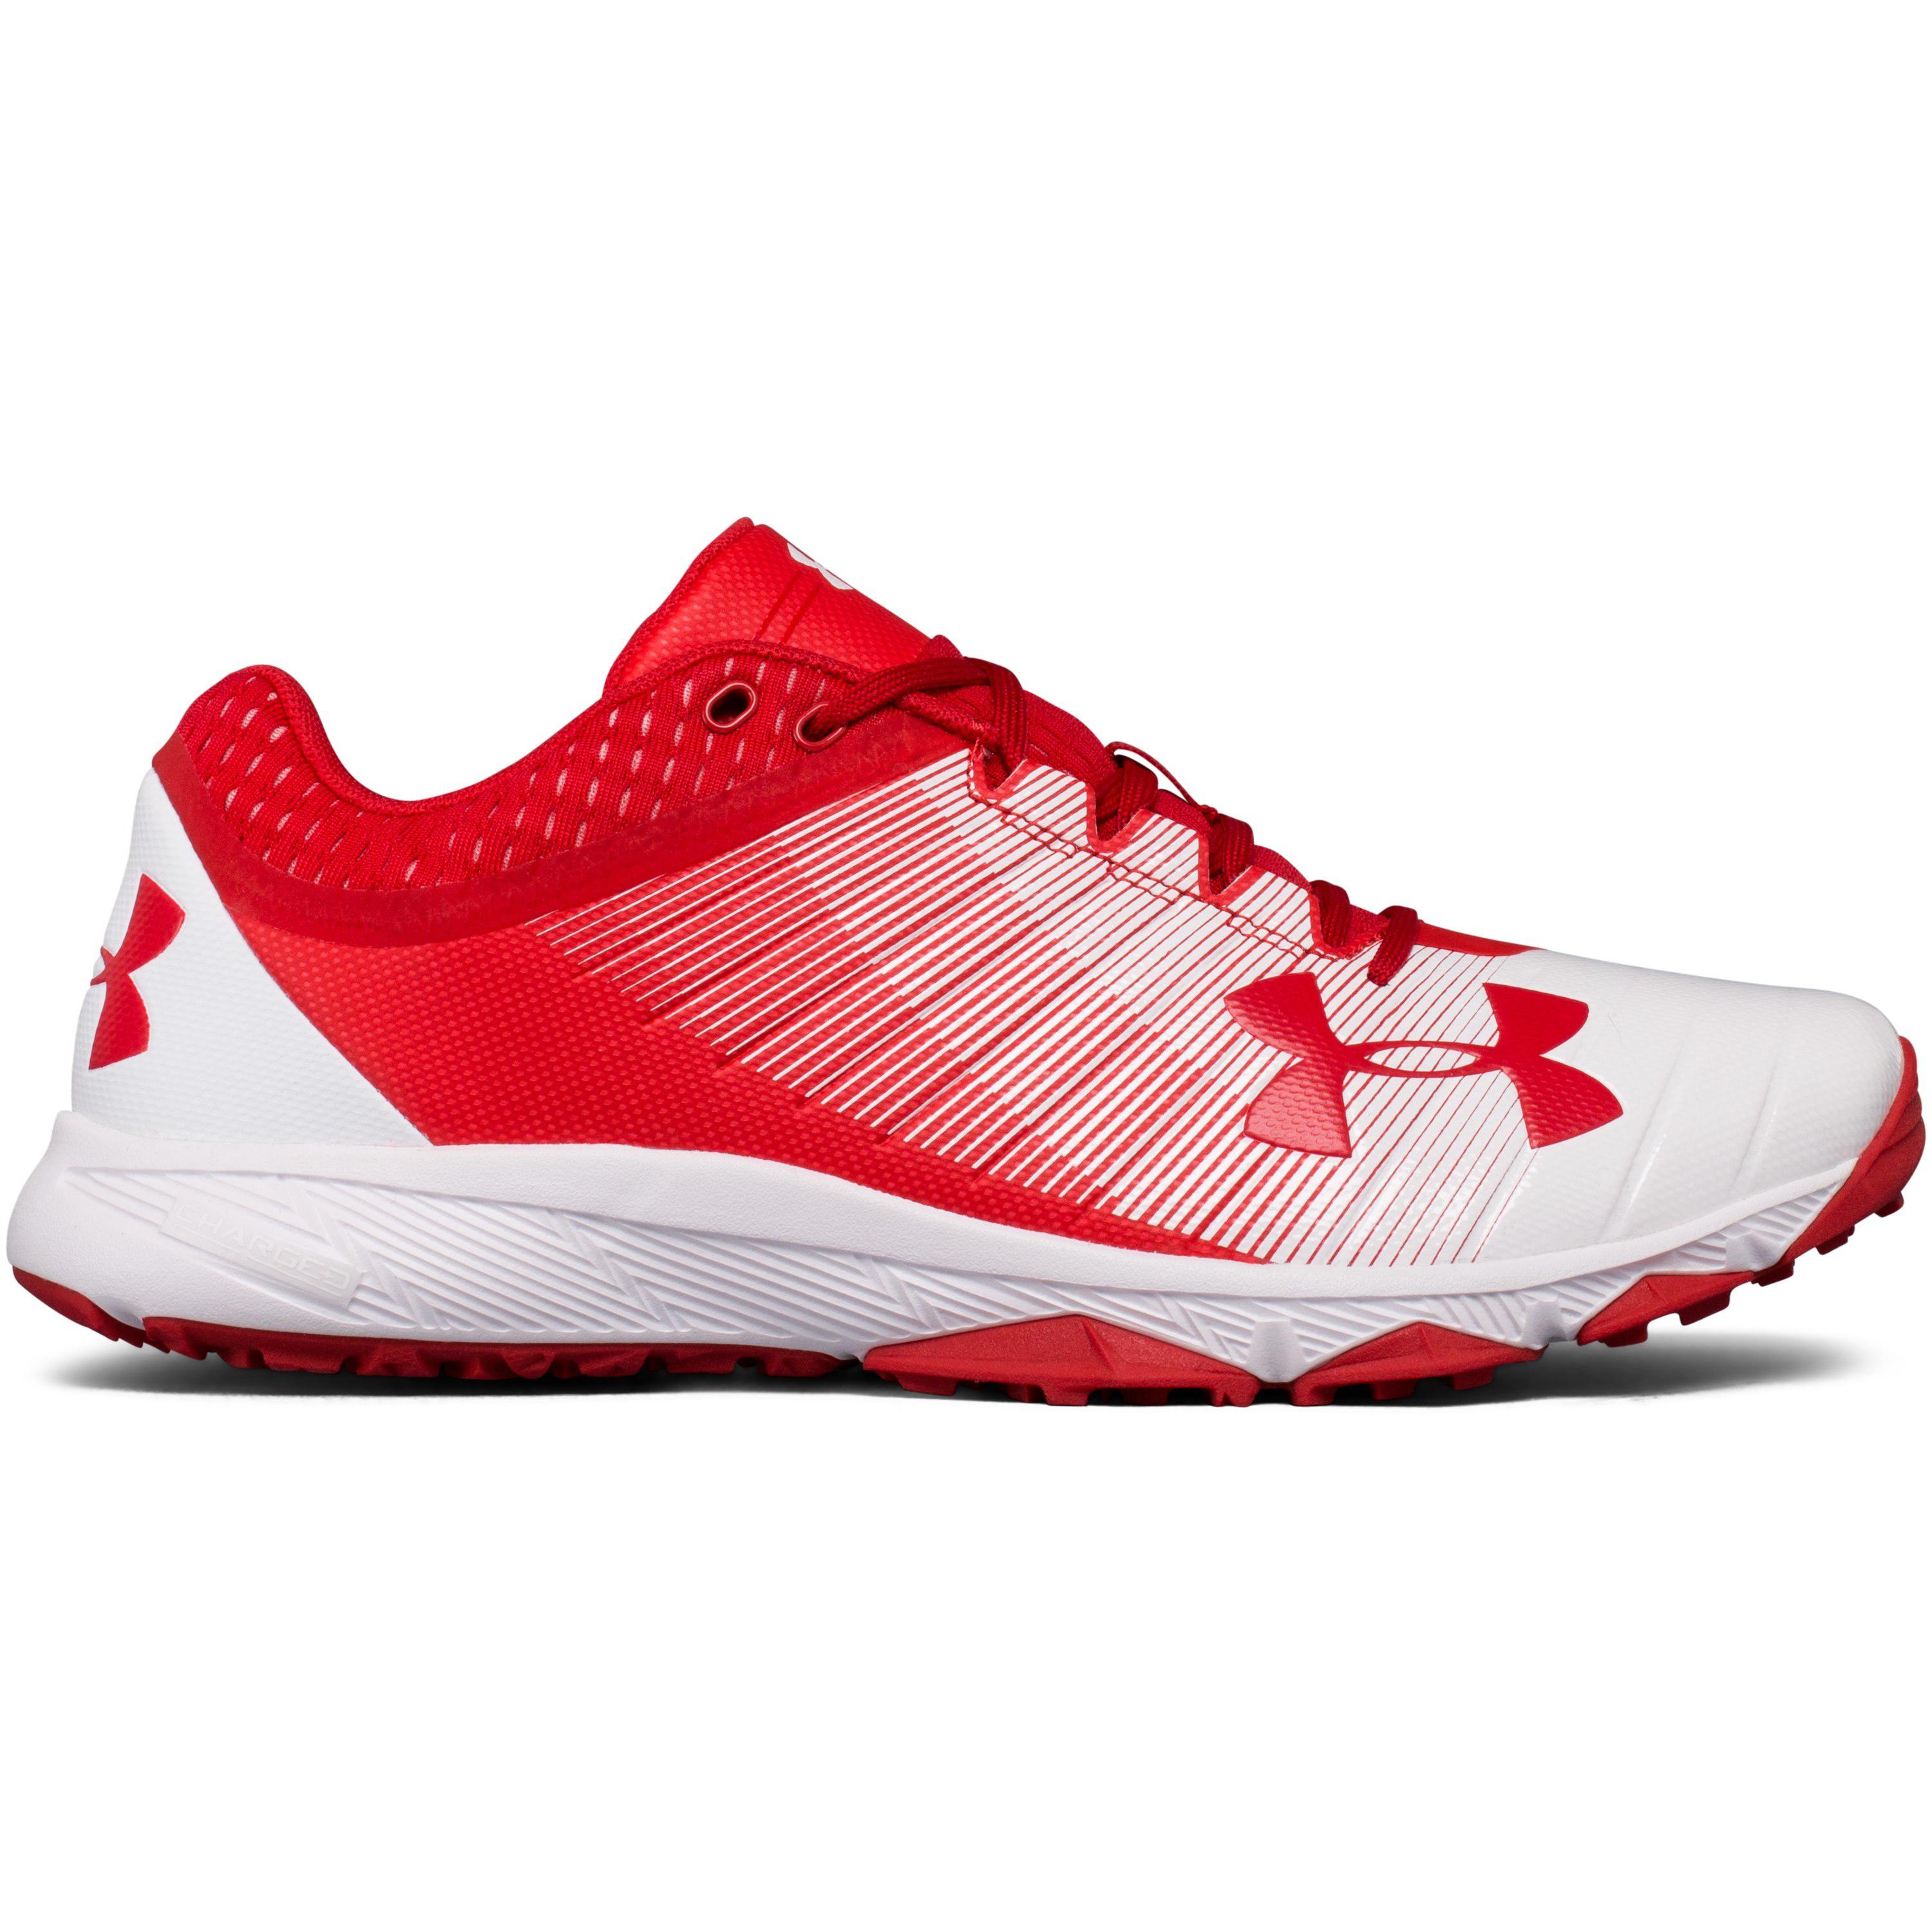 Under Armour Yard Trainer Shoes | vlr.eng.br